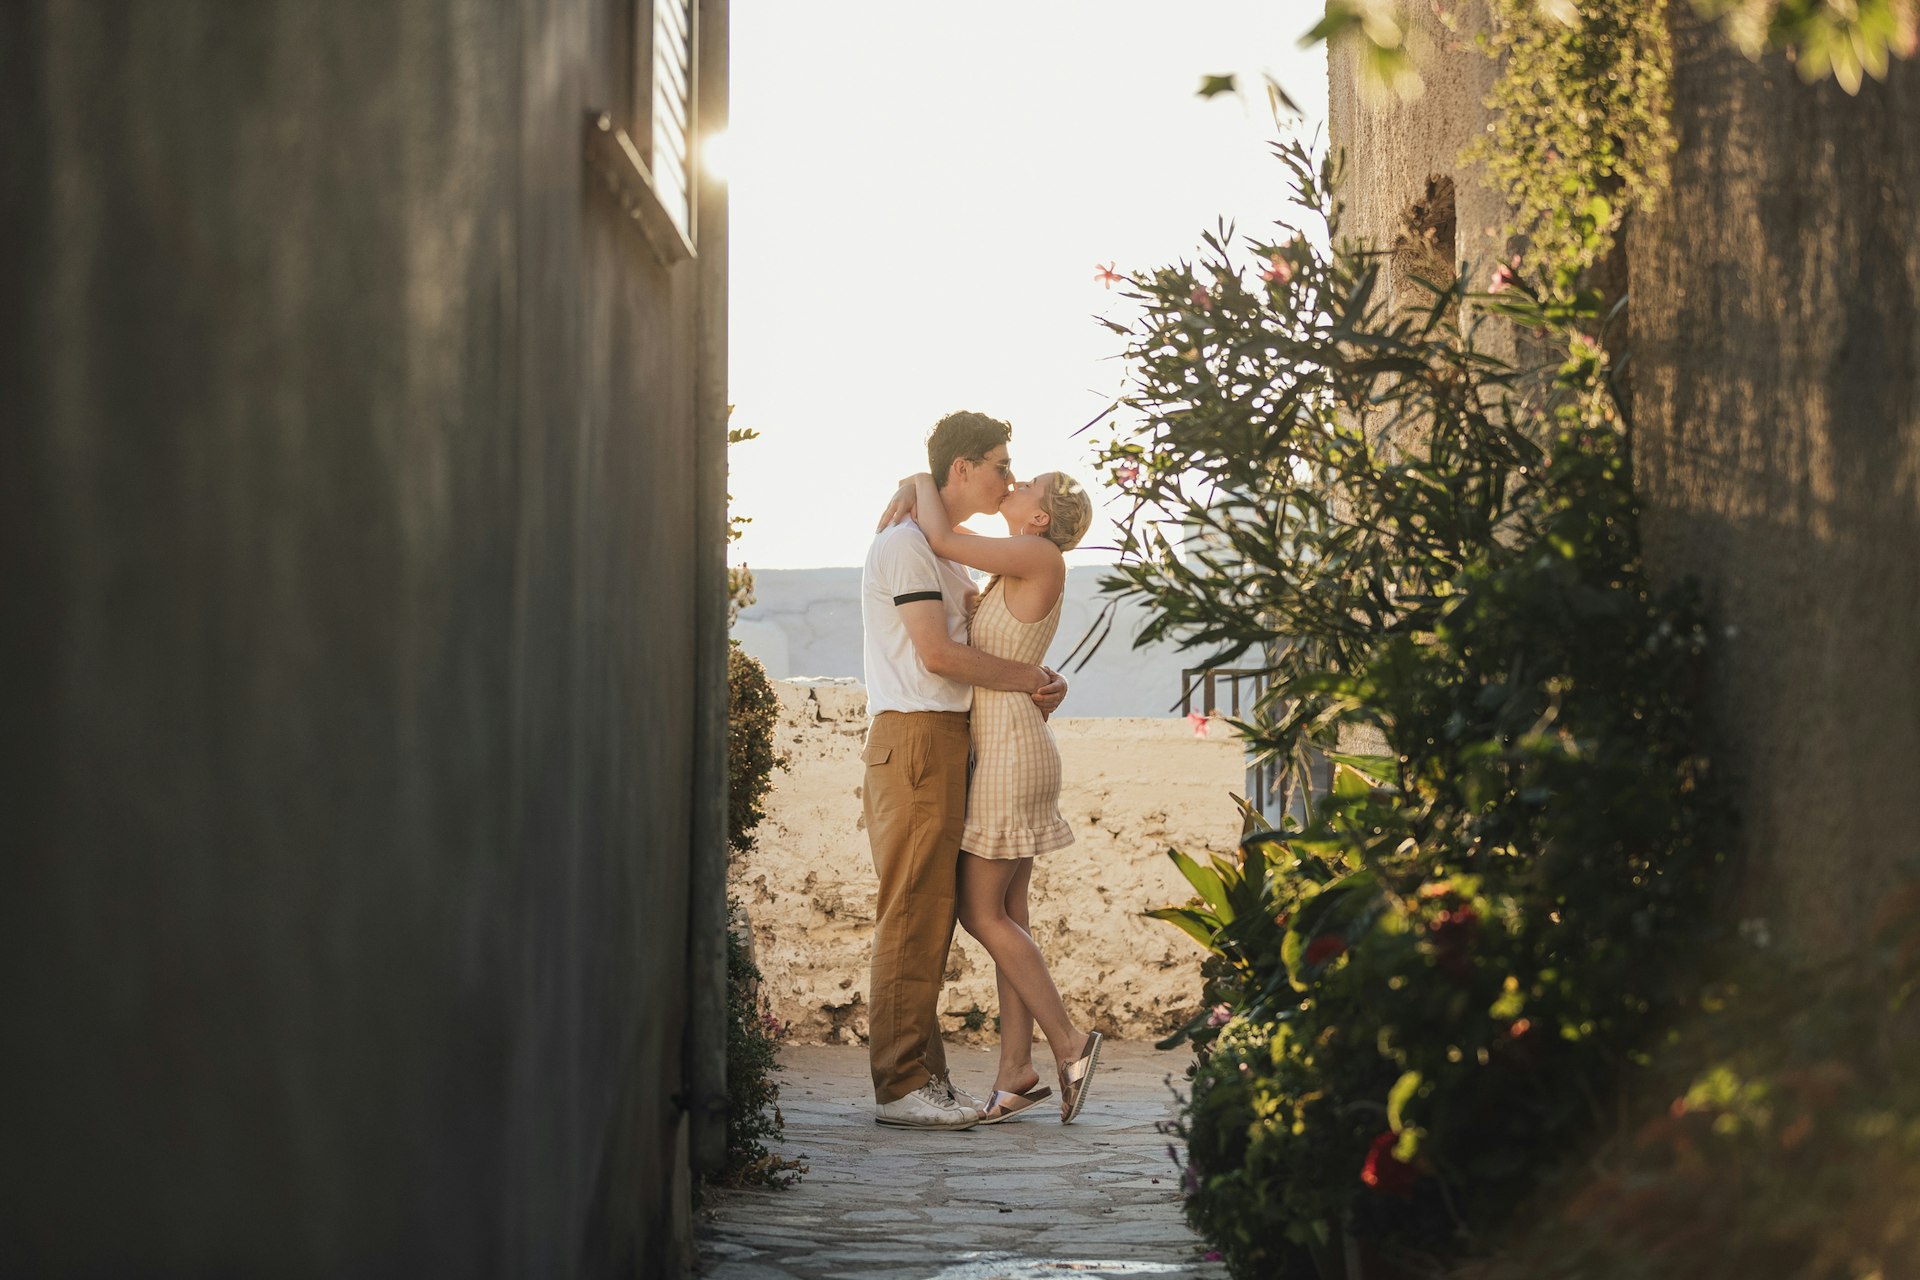 Couple in love on Mediterranean holiday, happiness, affection, carefree kiss down alleywayt 